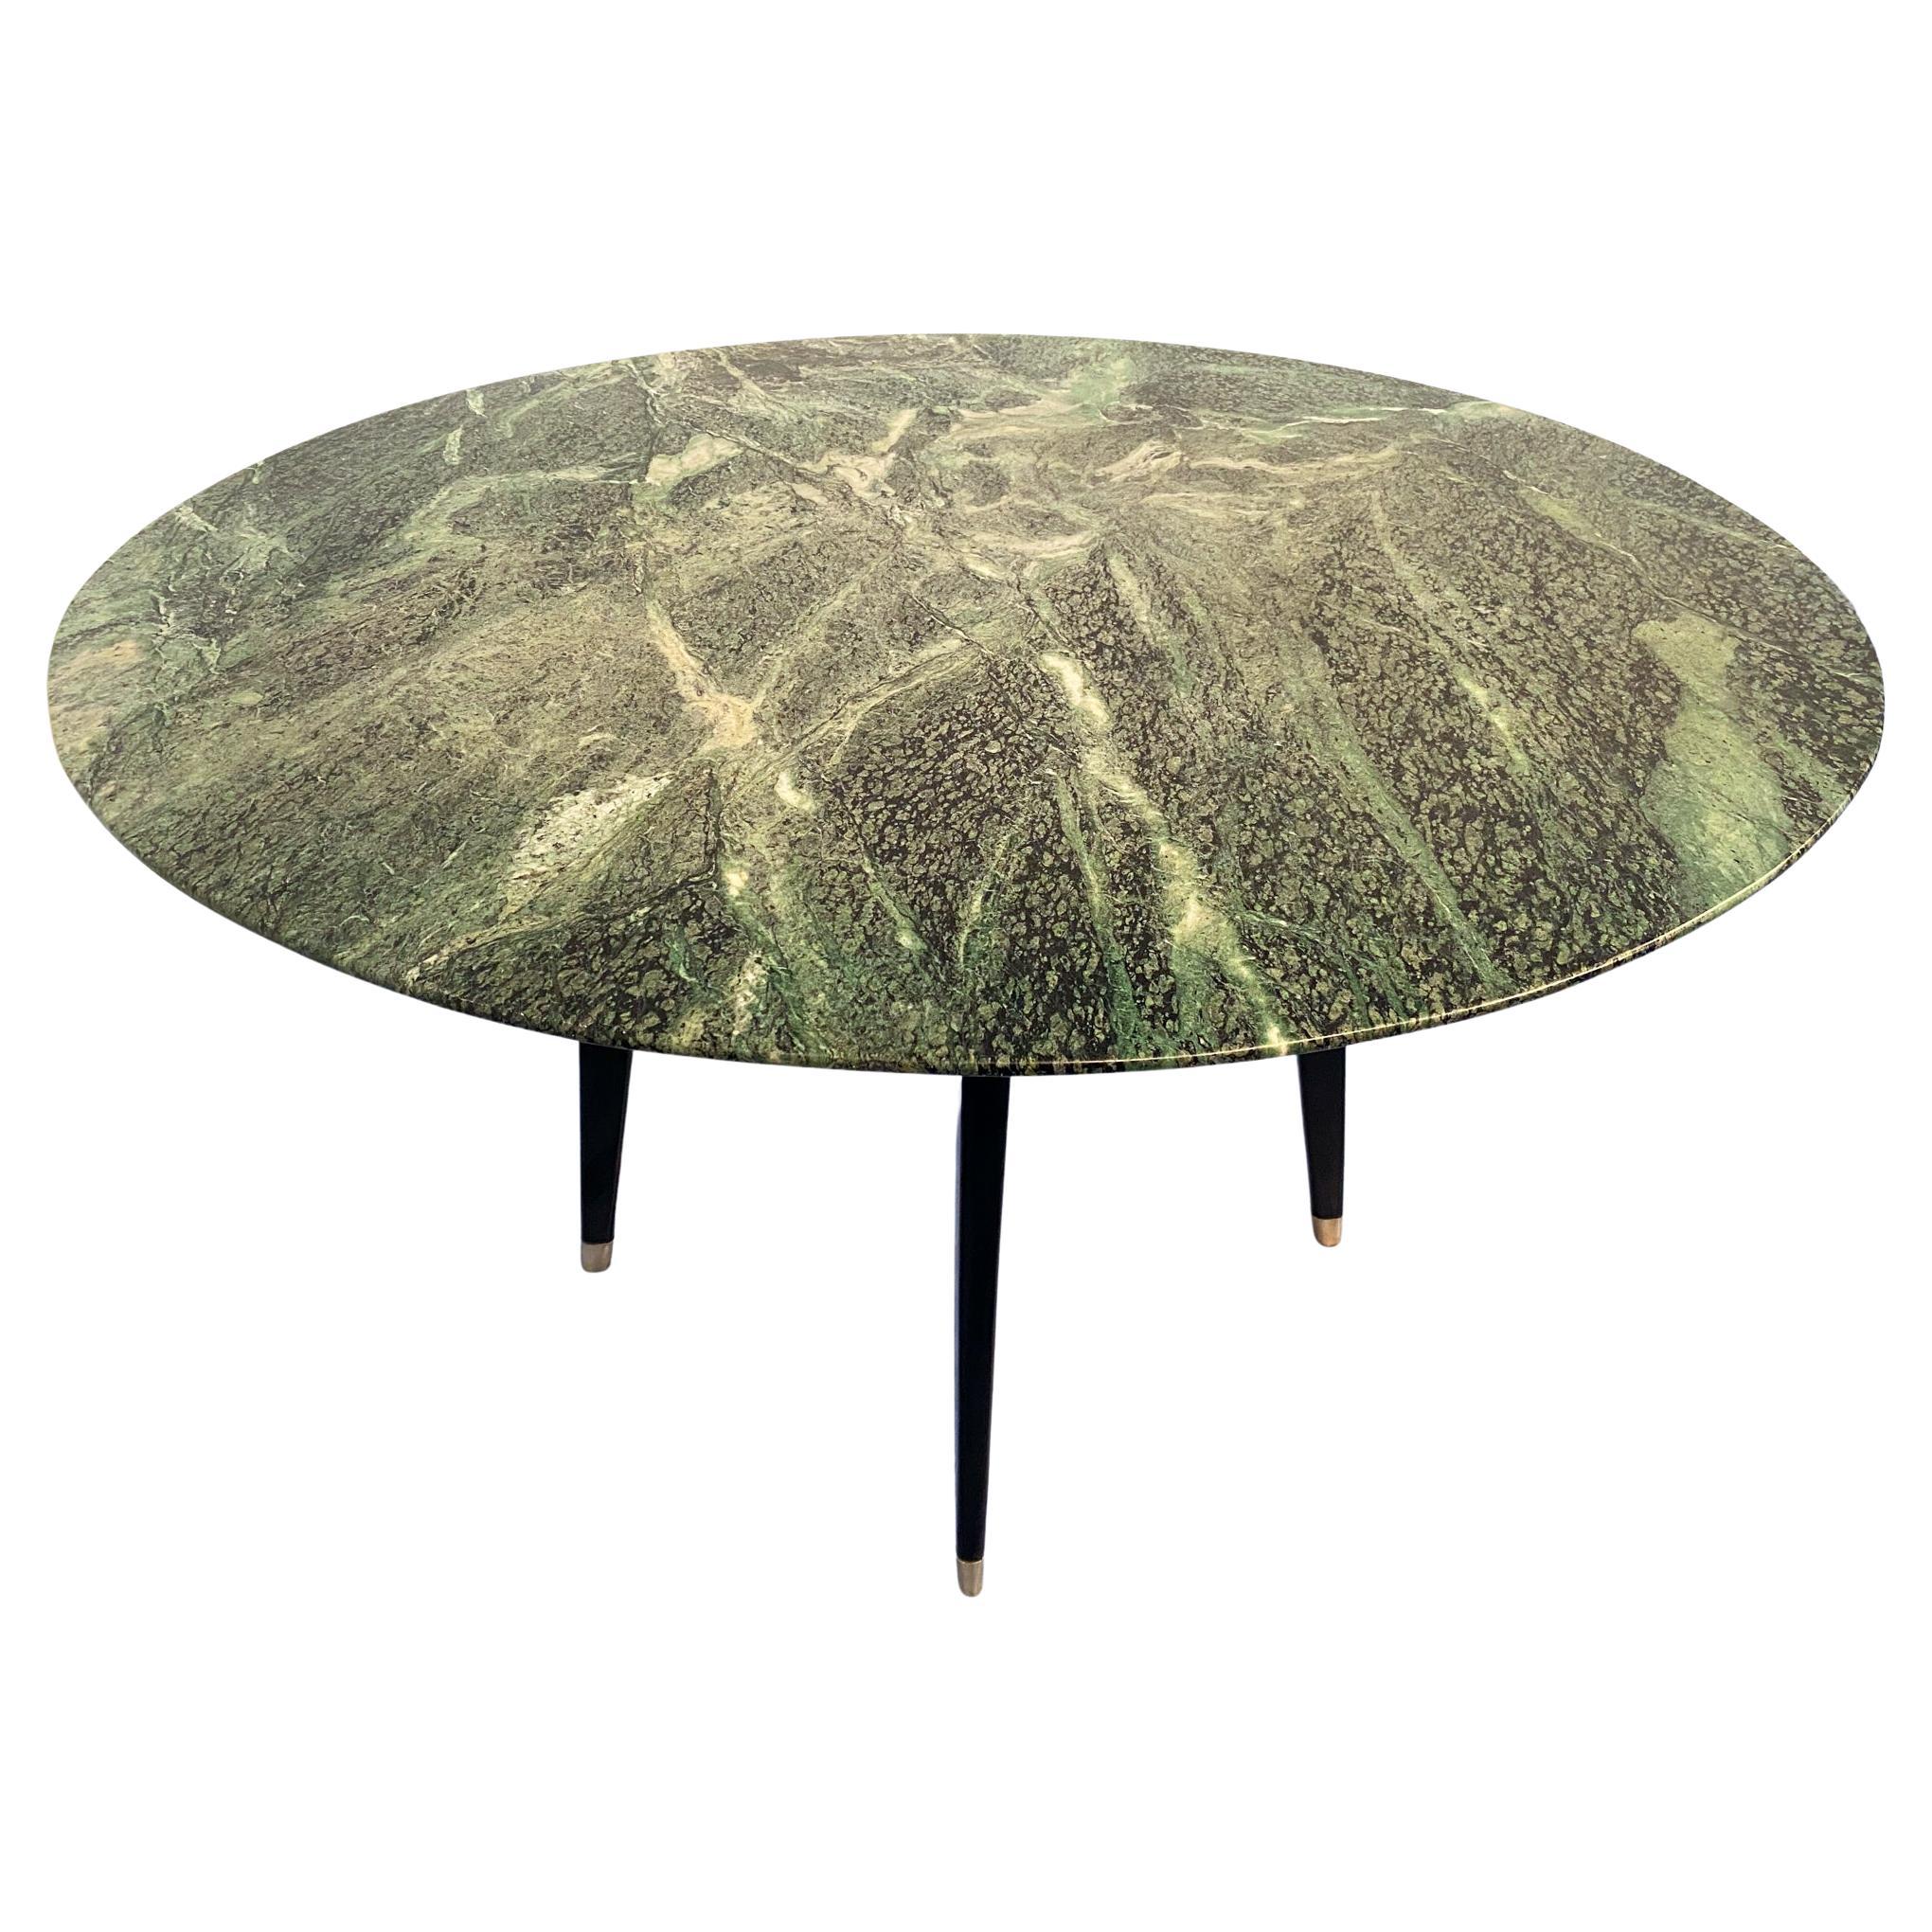 This stylish mid-century round marble support or center table is a stunning example of 1950s Italian design. The top is crafted from precious green marble from the Alps. The black lacquered walnut base, the original cross support at the center, and